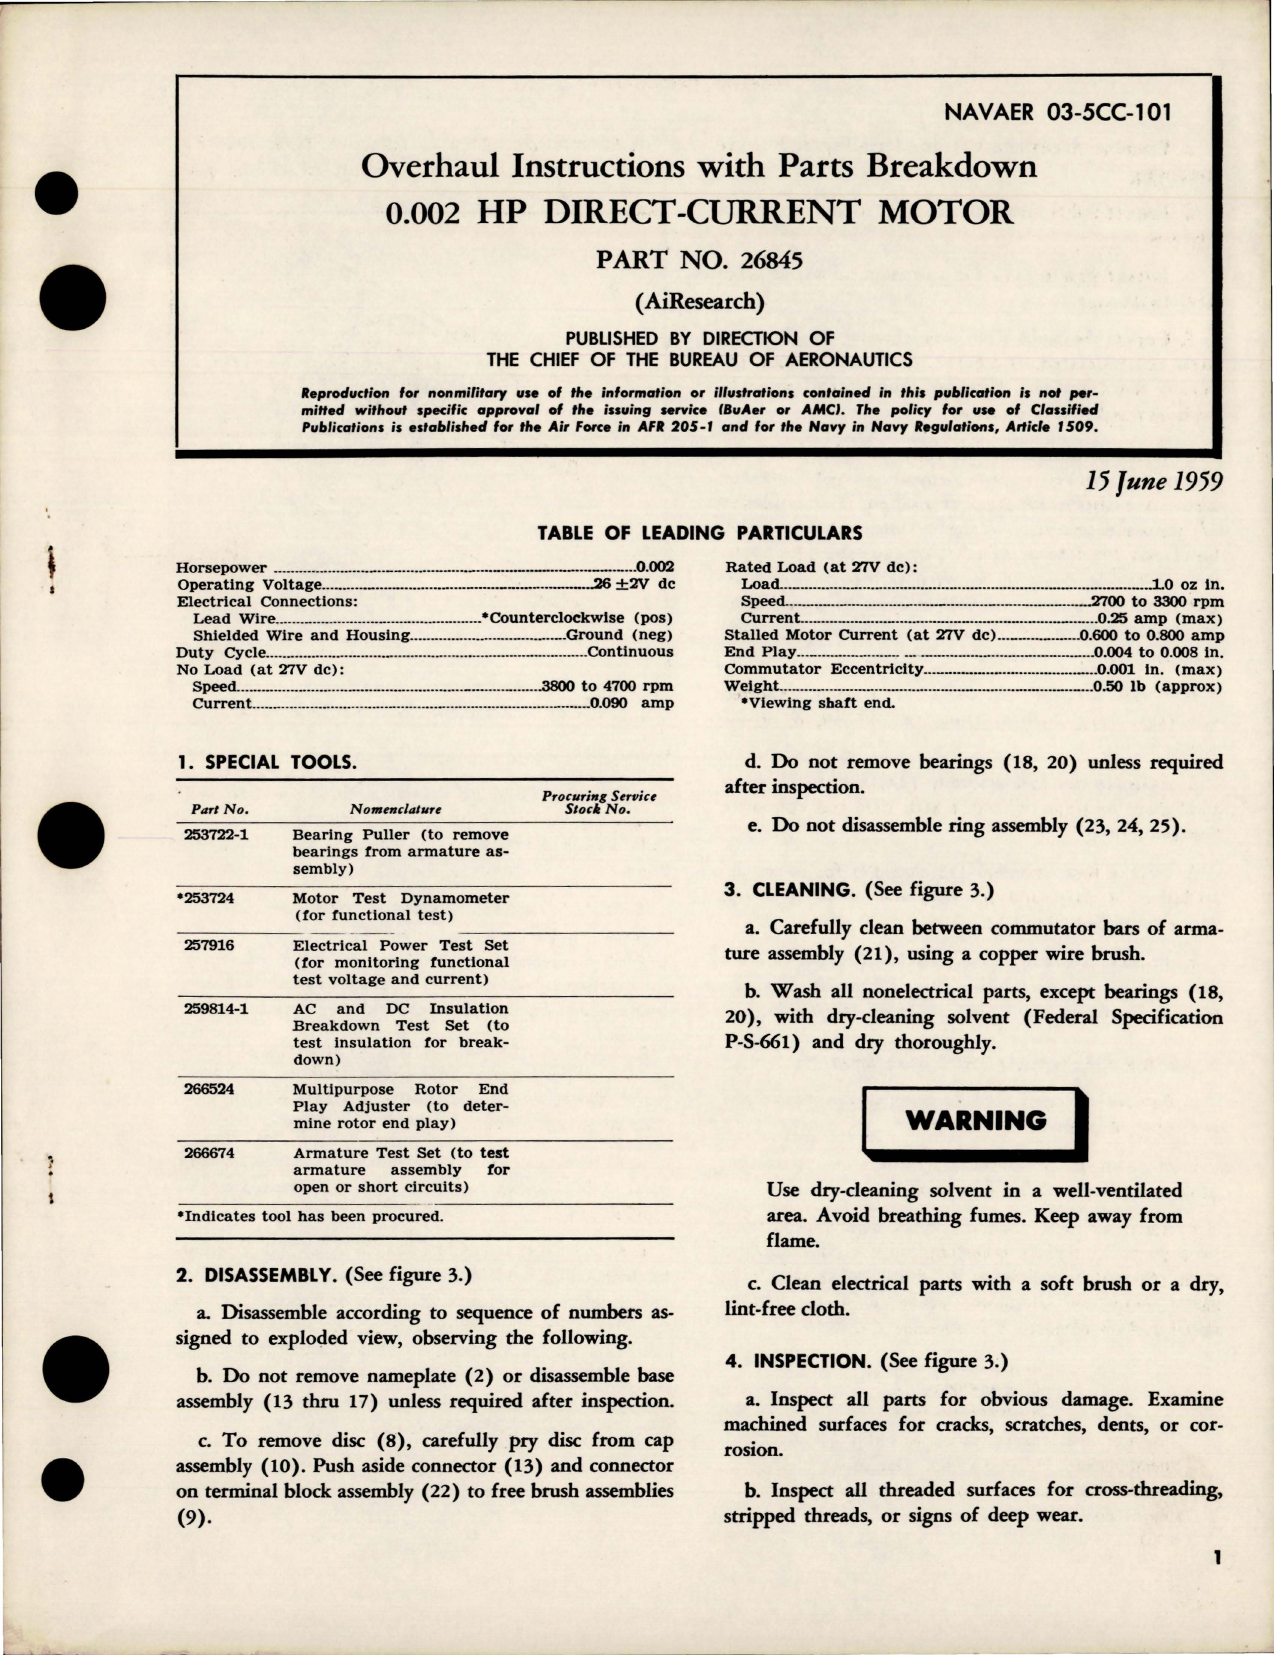 Sample page 1 from AirCorps Library document: Overhaul Instructions with Parts Breakdown for Direct Current Motor - 0.002 HP - Part 26845 